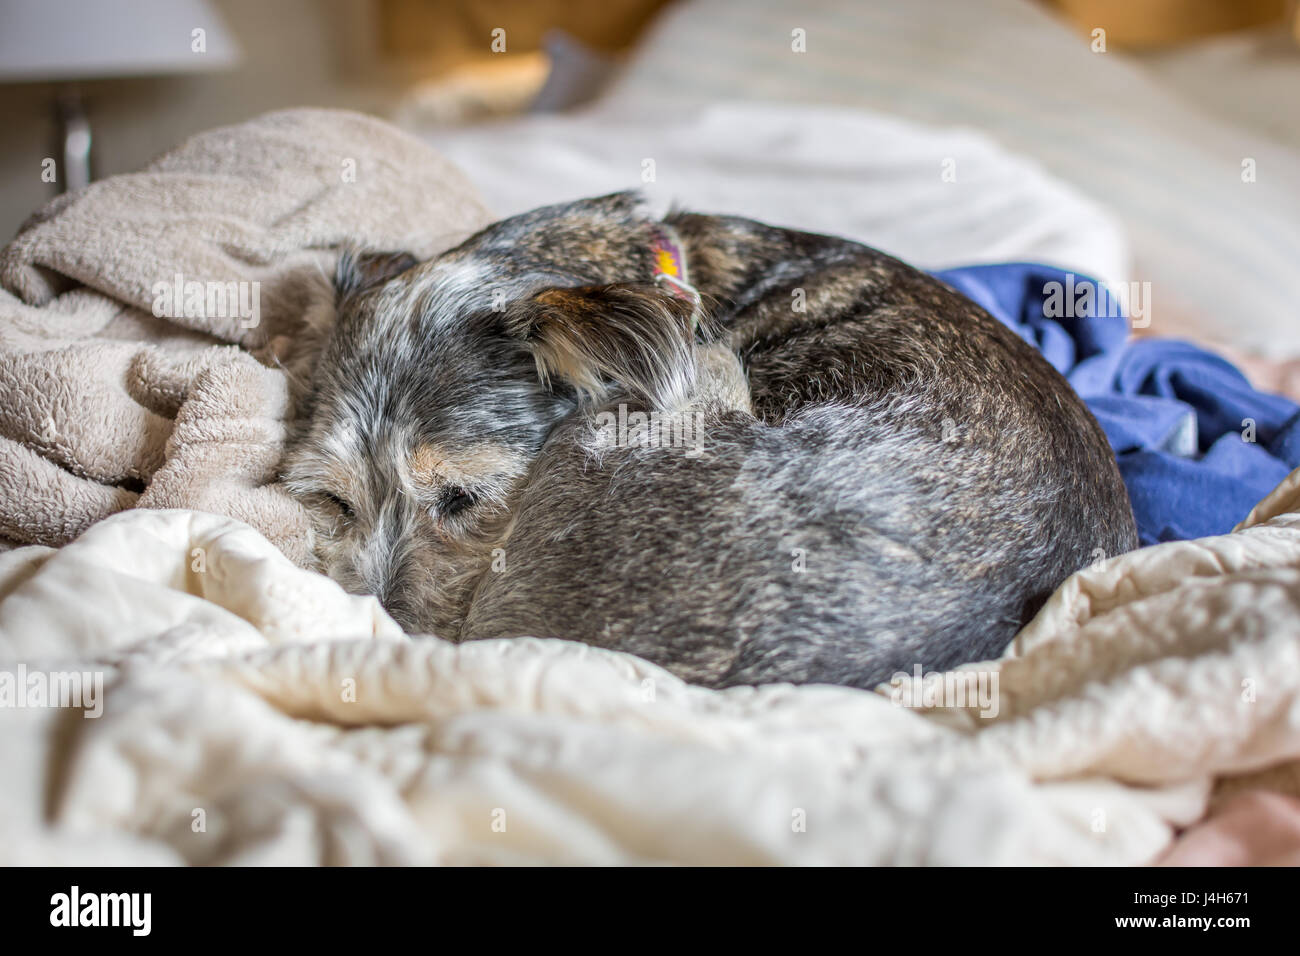 A small dog curled up into a ball, peacefully sleeping on a comfortable pile of blankets on the bed. Stock Photo